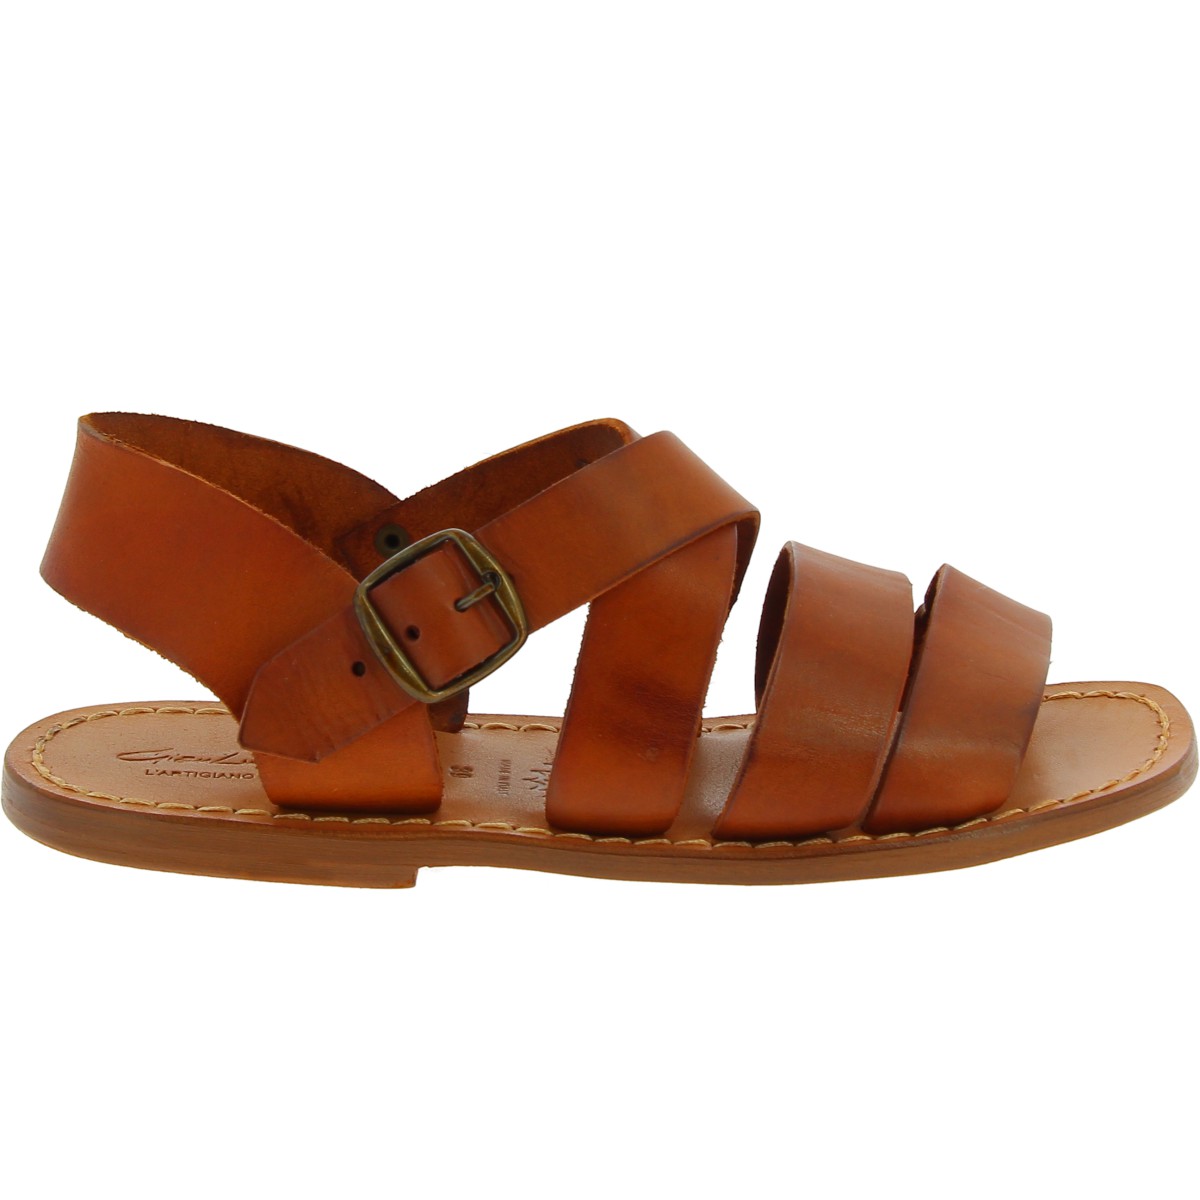 Handmade men's sandals in tan leather Made in Italy | The leather craftsmen